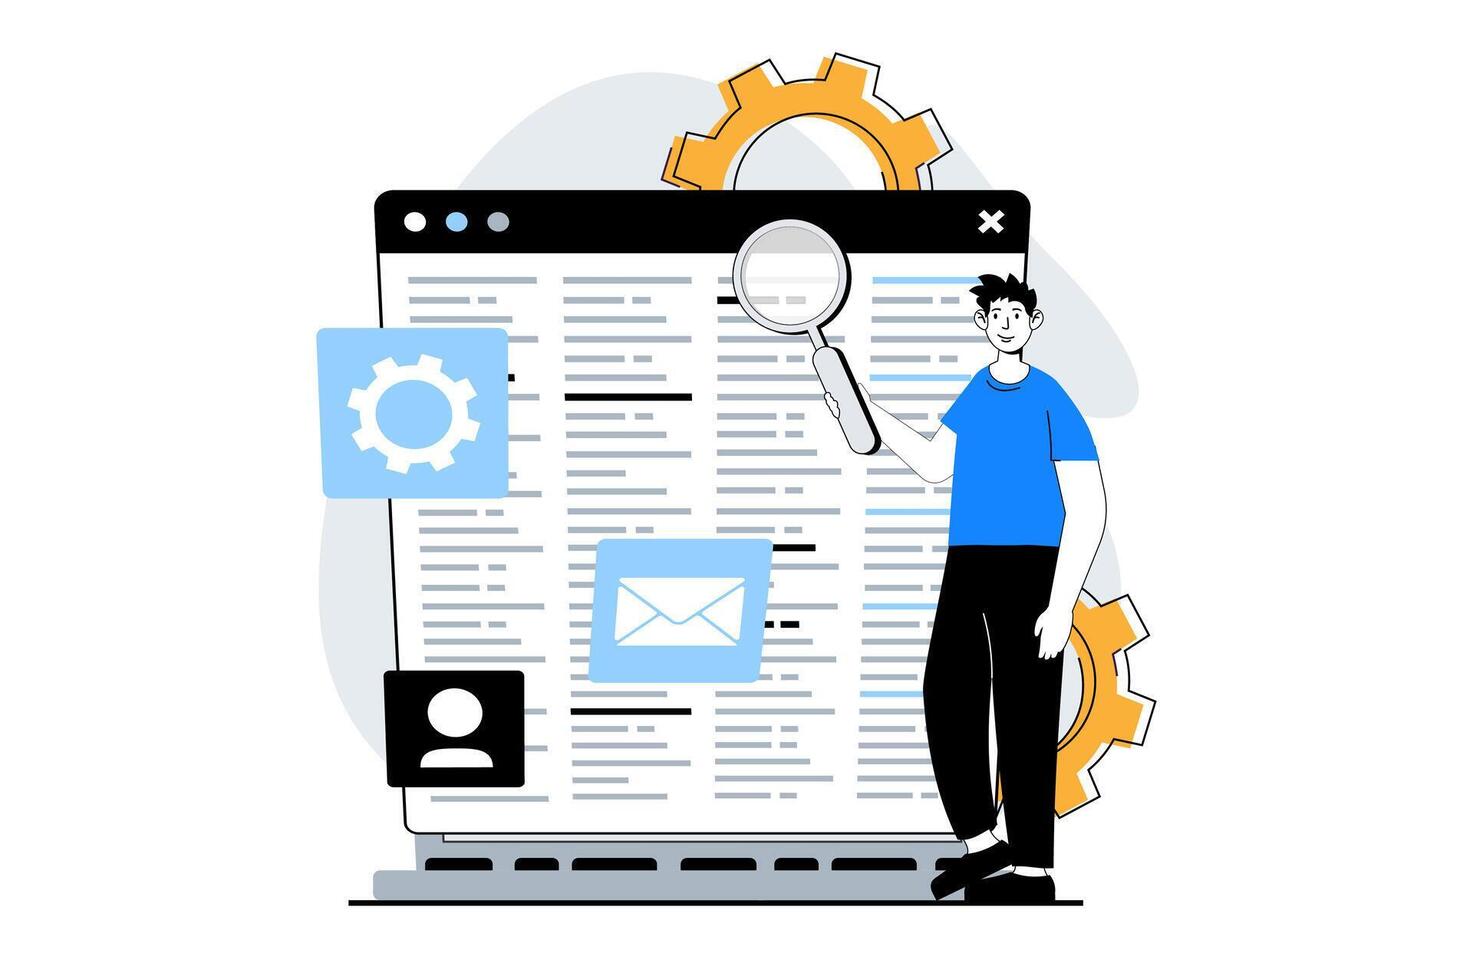 Web development concept with people scene in flat design. Man searching, settings and fixing bugs in programming code for layout. Vector illustration for social media banner, marketing material.